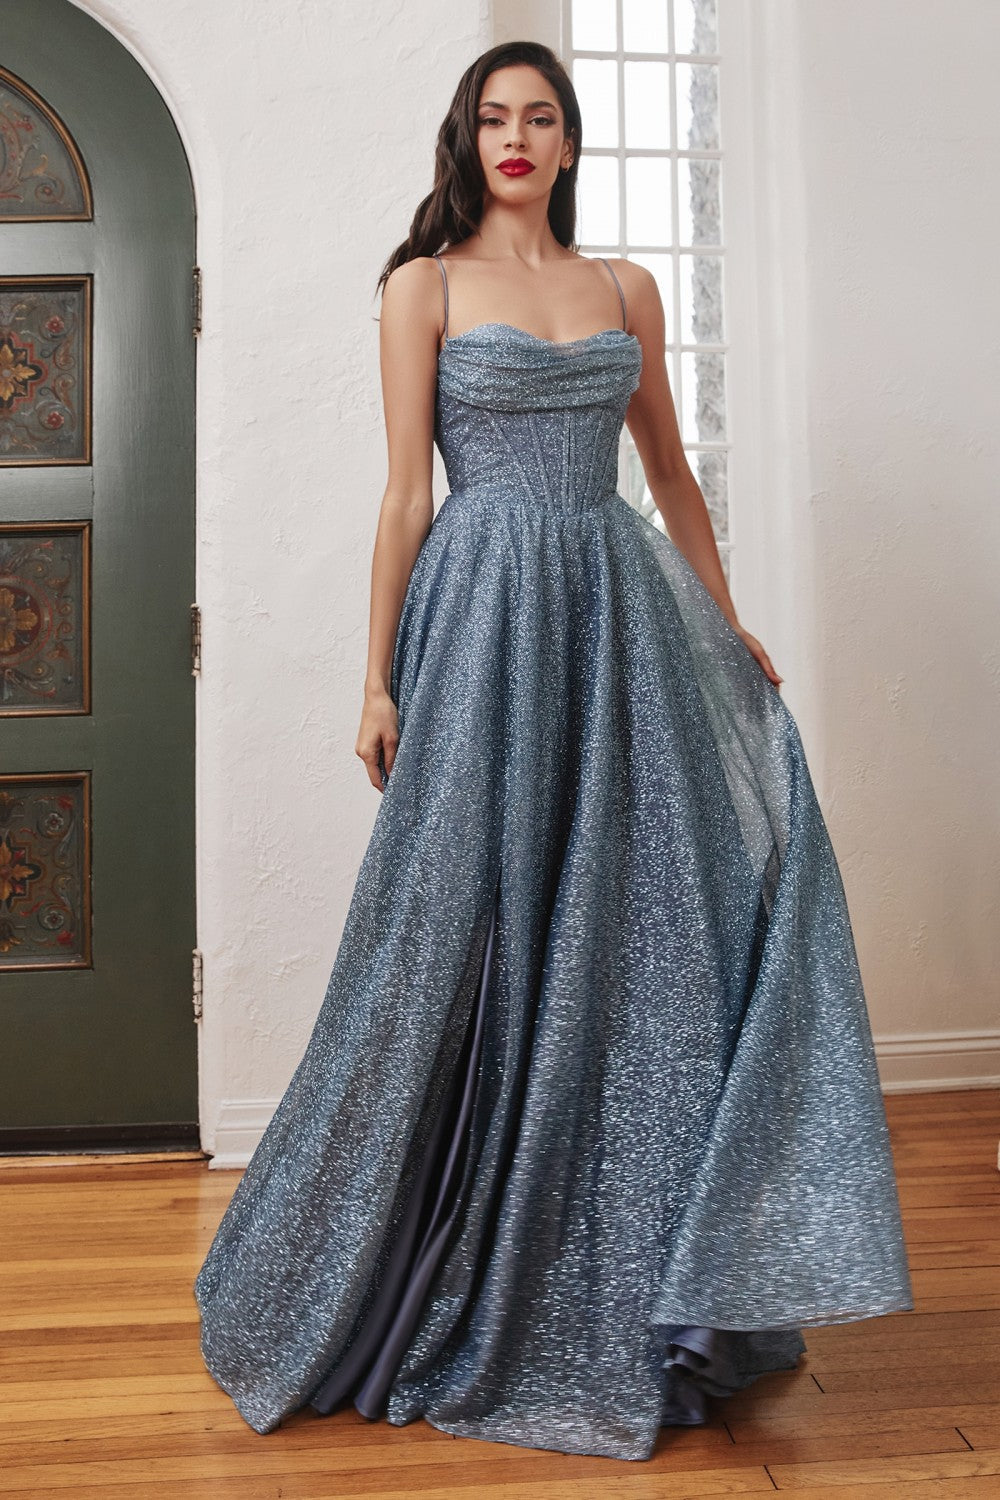 Smoky-blue Glitter A-Line Slit Gown CD252C - Women Evening Formal Gown - Curves